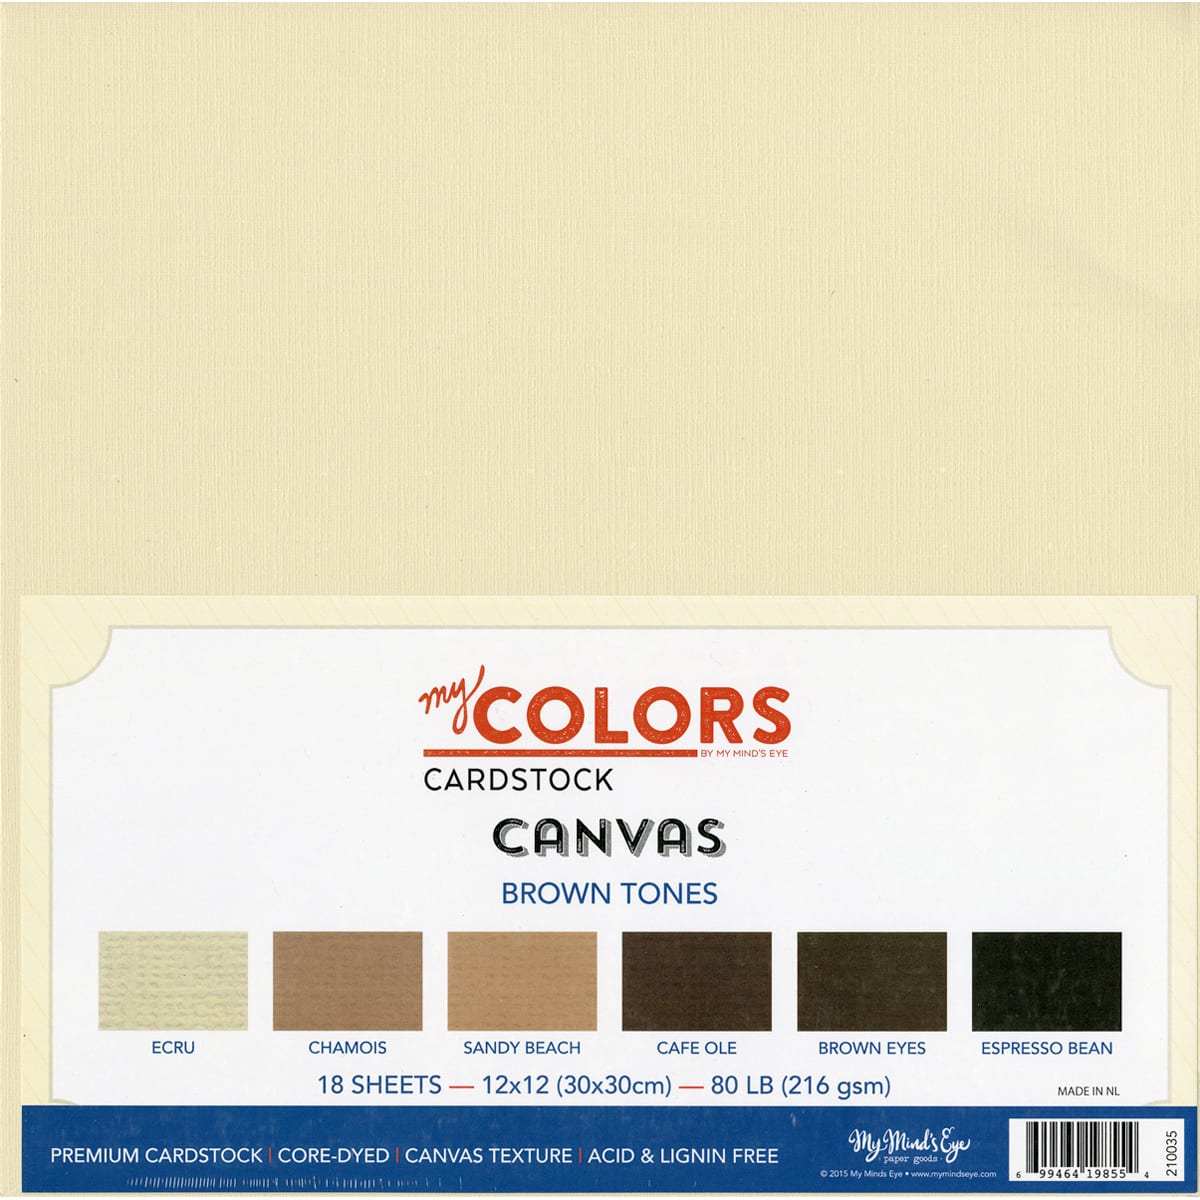 12x12 cardstock shop colors of the world (pack of 19) - 12x12 cardstock  paper - assorted colors, skintone